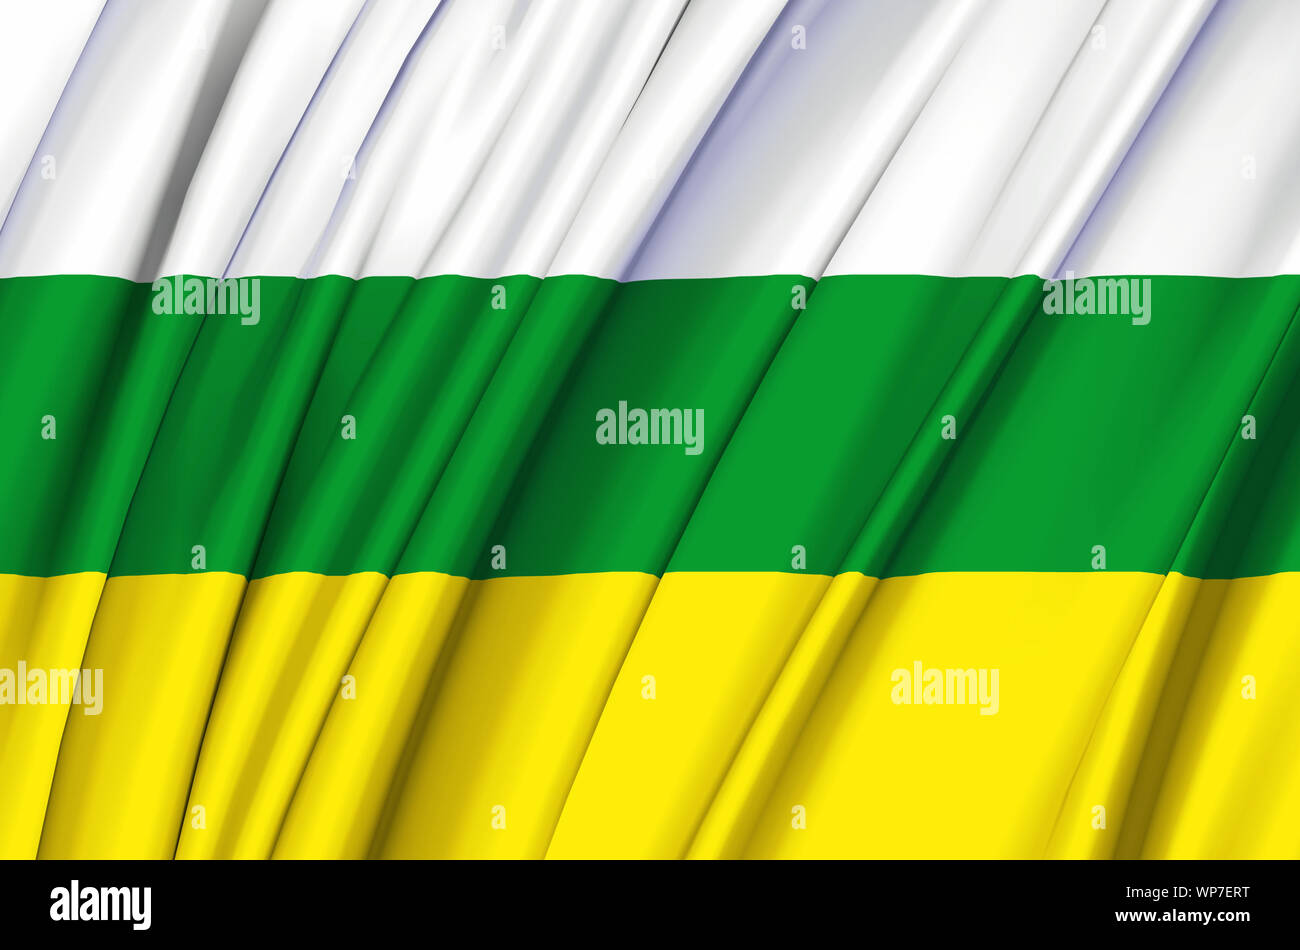 Zamora Chinchipe waving flag illustration. Regions of Ecuador. Perfect for background and texture usage. Stock Photo